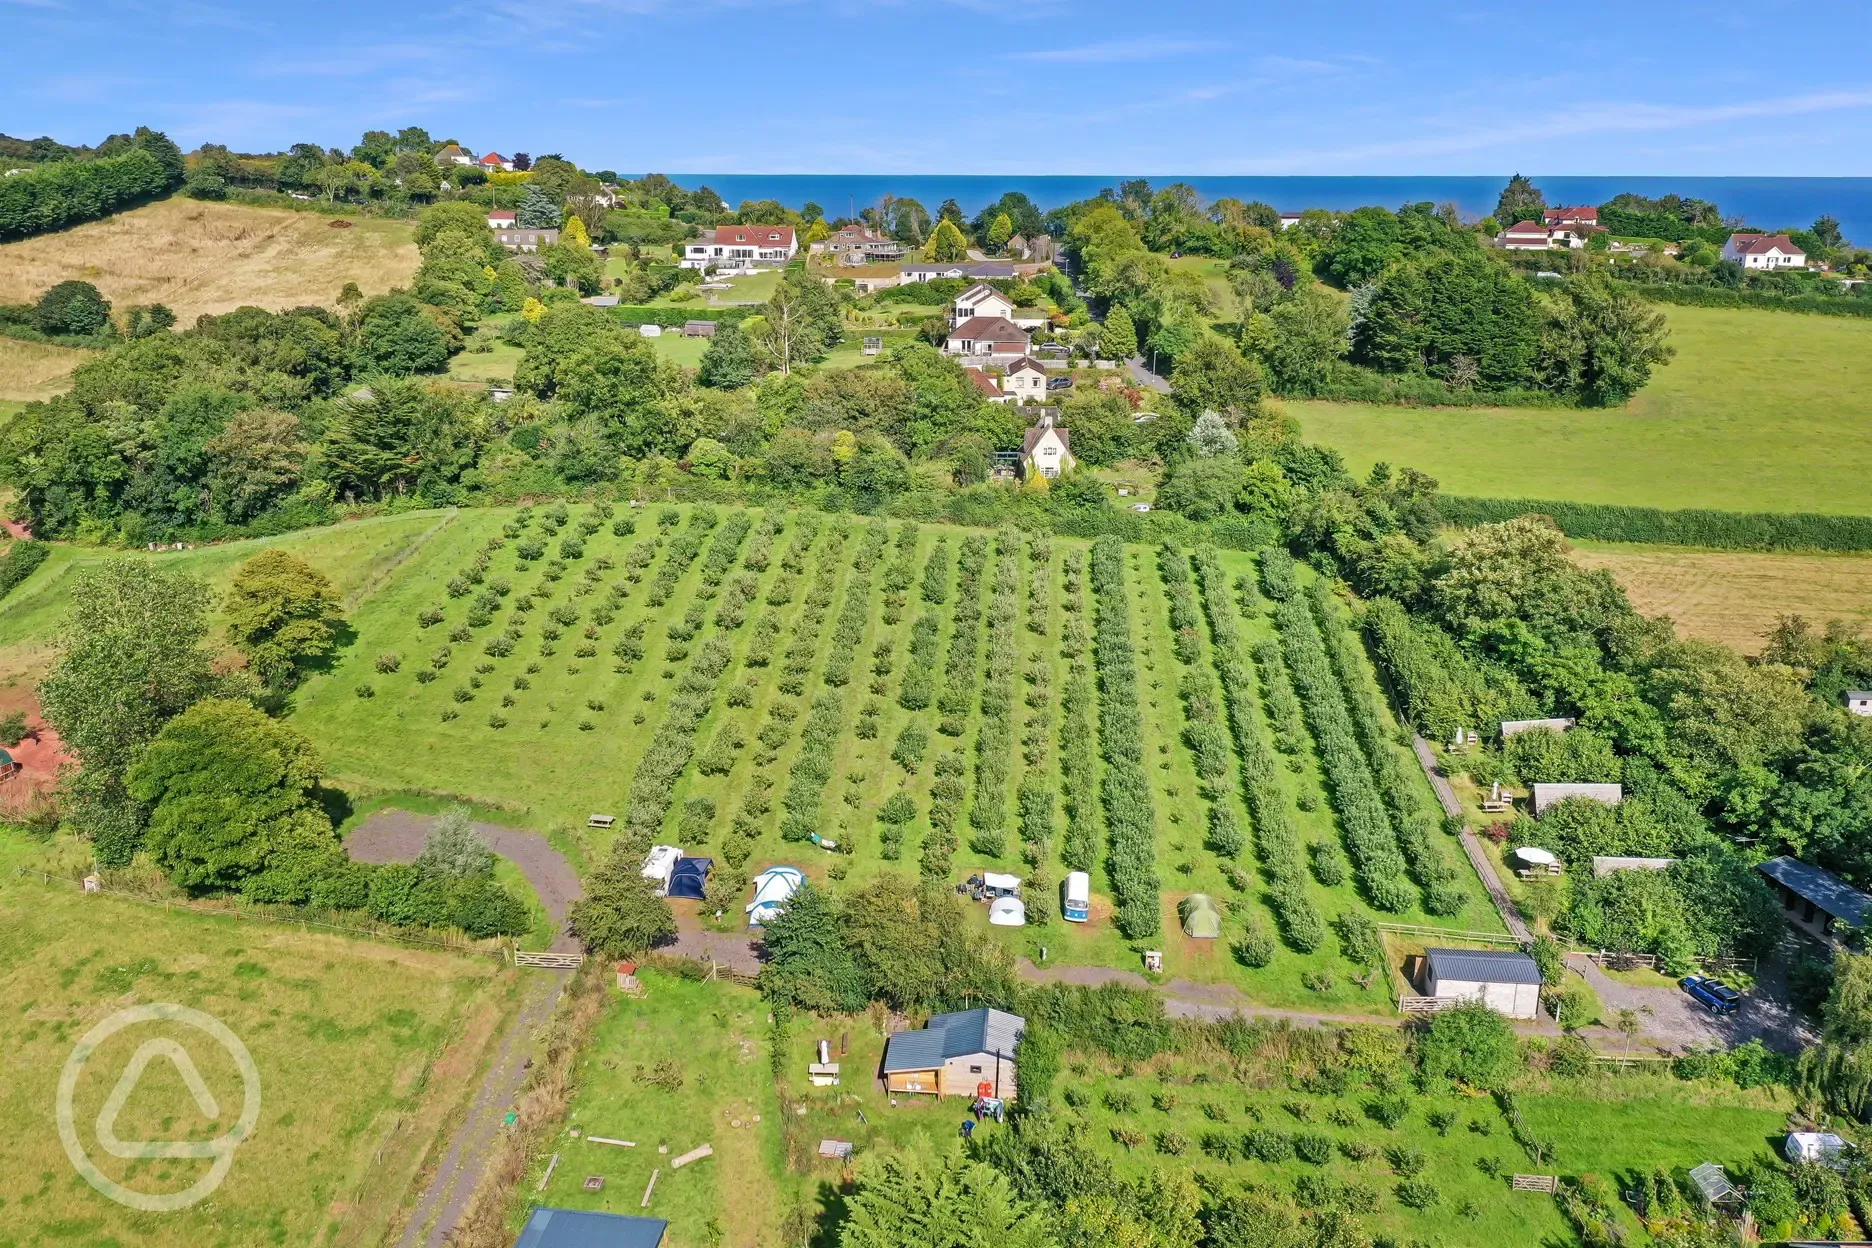 Aerial of the campsite and orchard